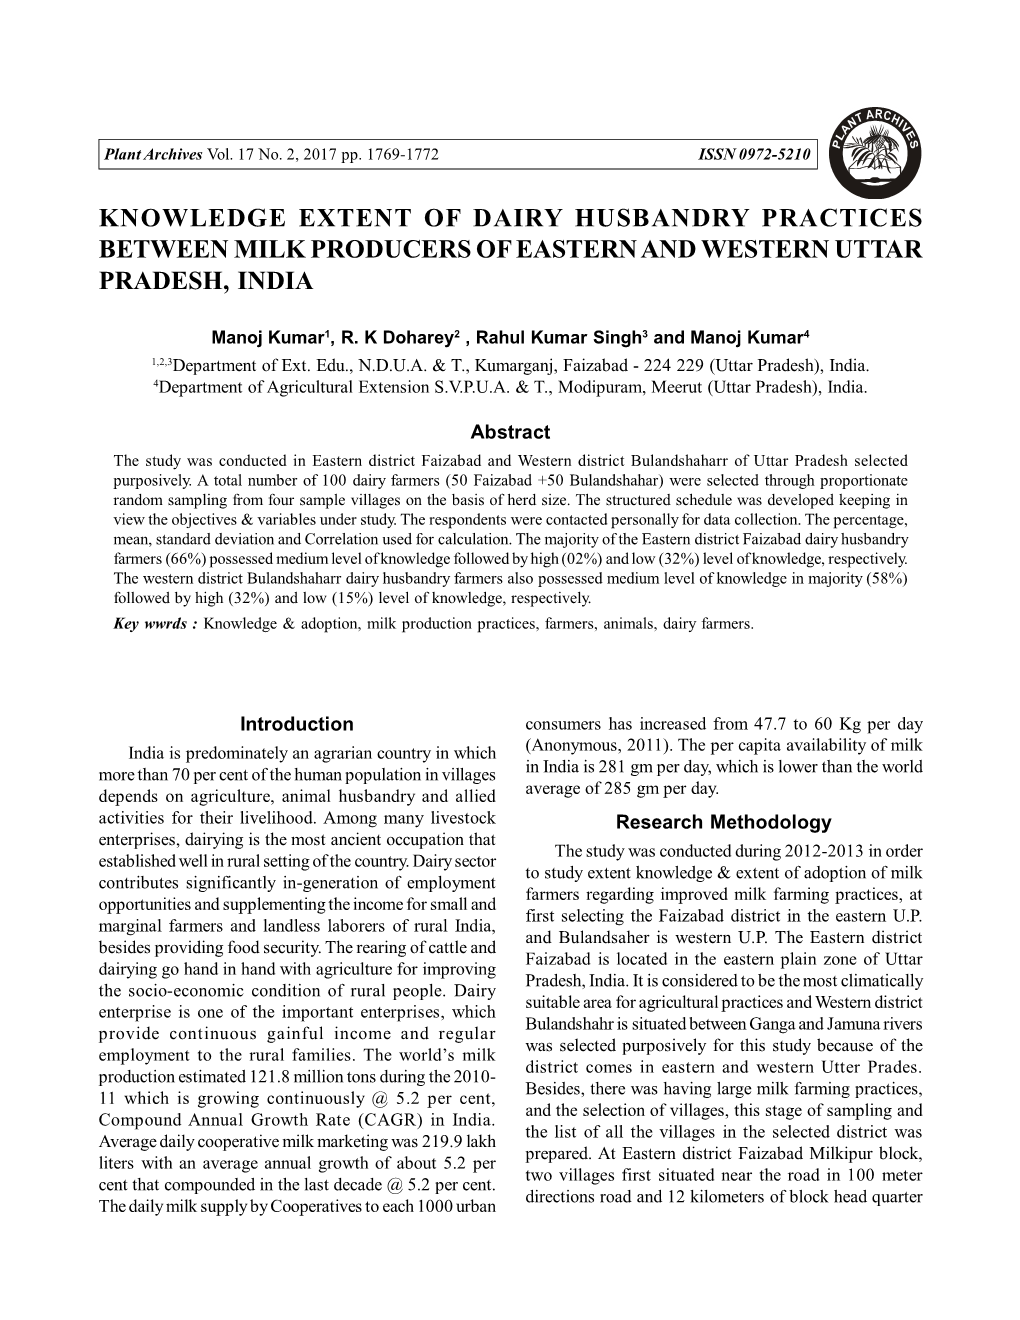 Knowledge Extent of Dairy Husbandry Practices Between Milk Producers of Eastern and Western Uttar Pradesh, India